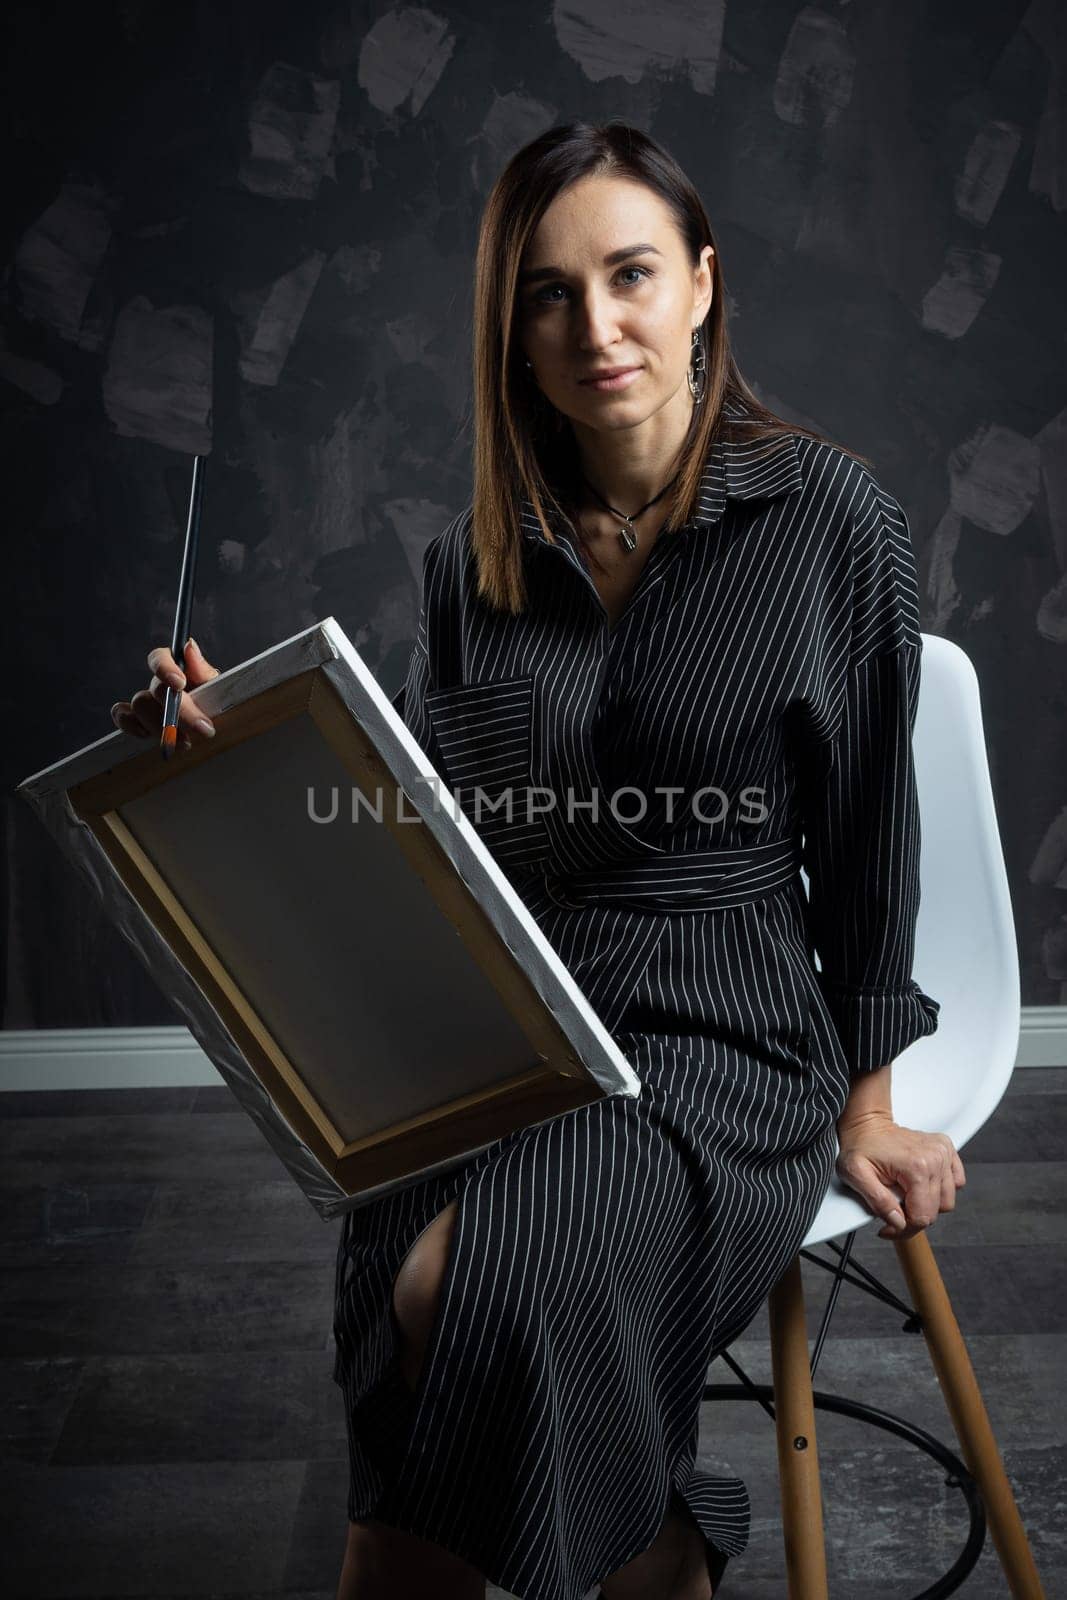 a young brunette female artist stands behind an easel. photo shoot on a black background in the studio